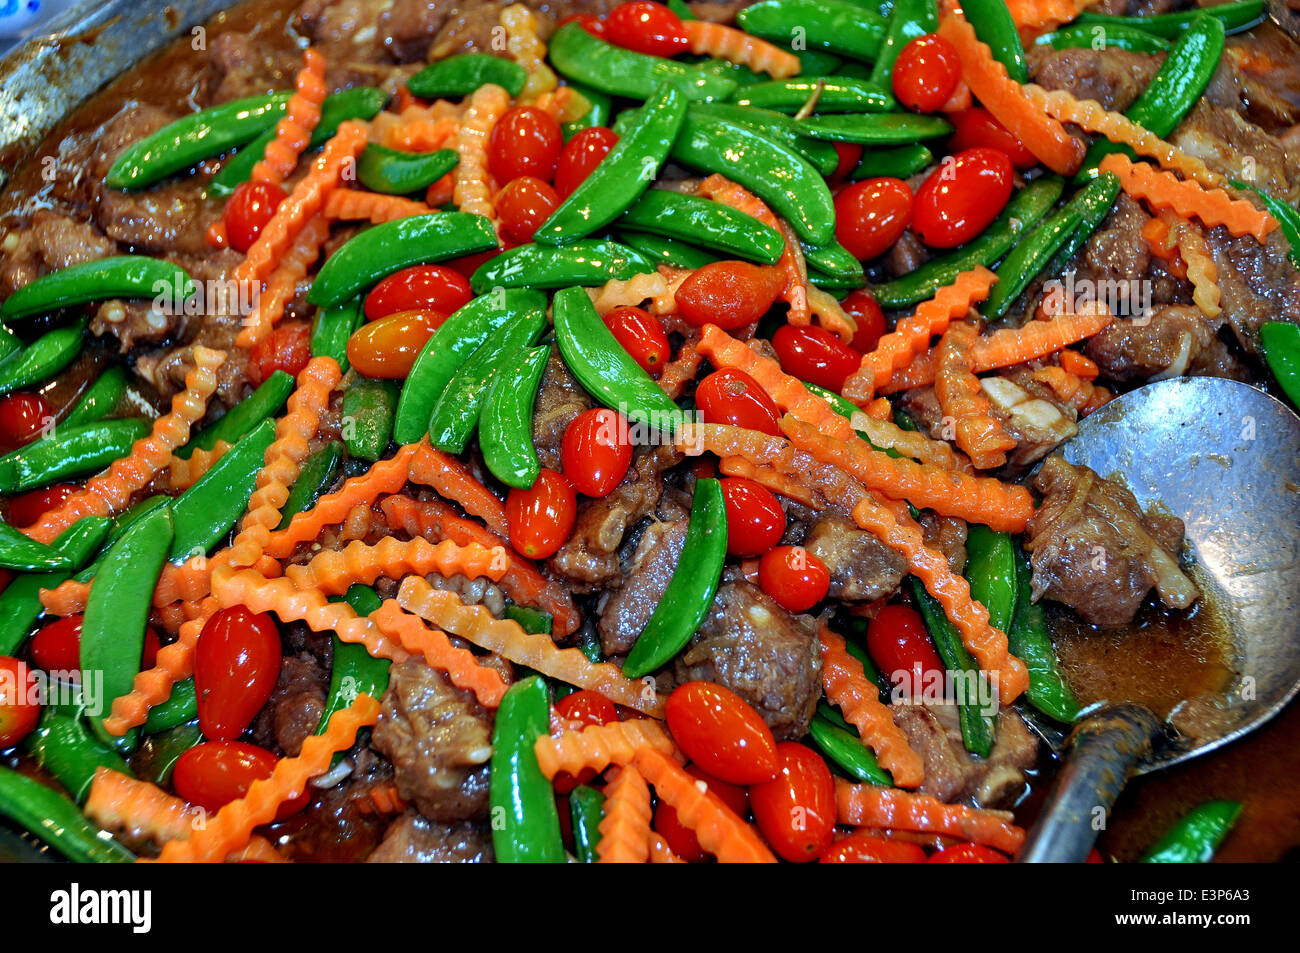 BANGKOK, THAILAND: Stir-fried beef, snow peas, cherry tomatoes, and julienne carrots tempts buyers at the Or Tor Kor Market Stock Photo